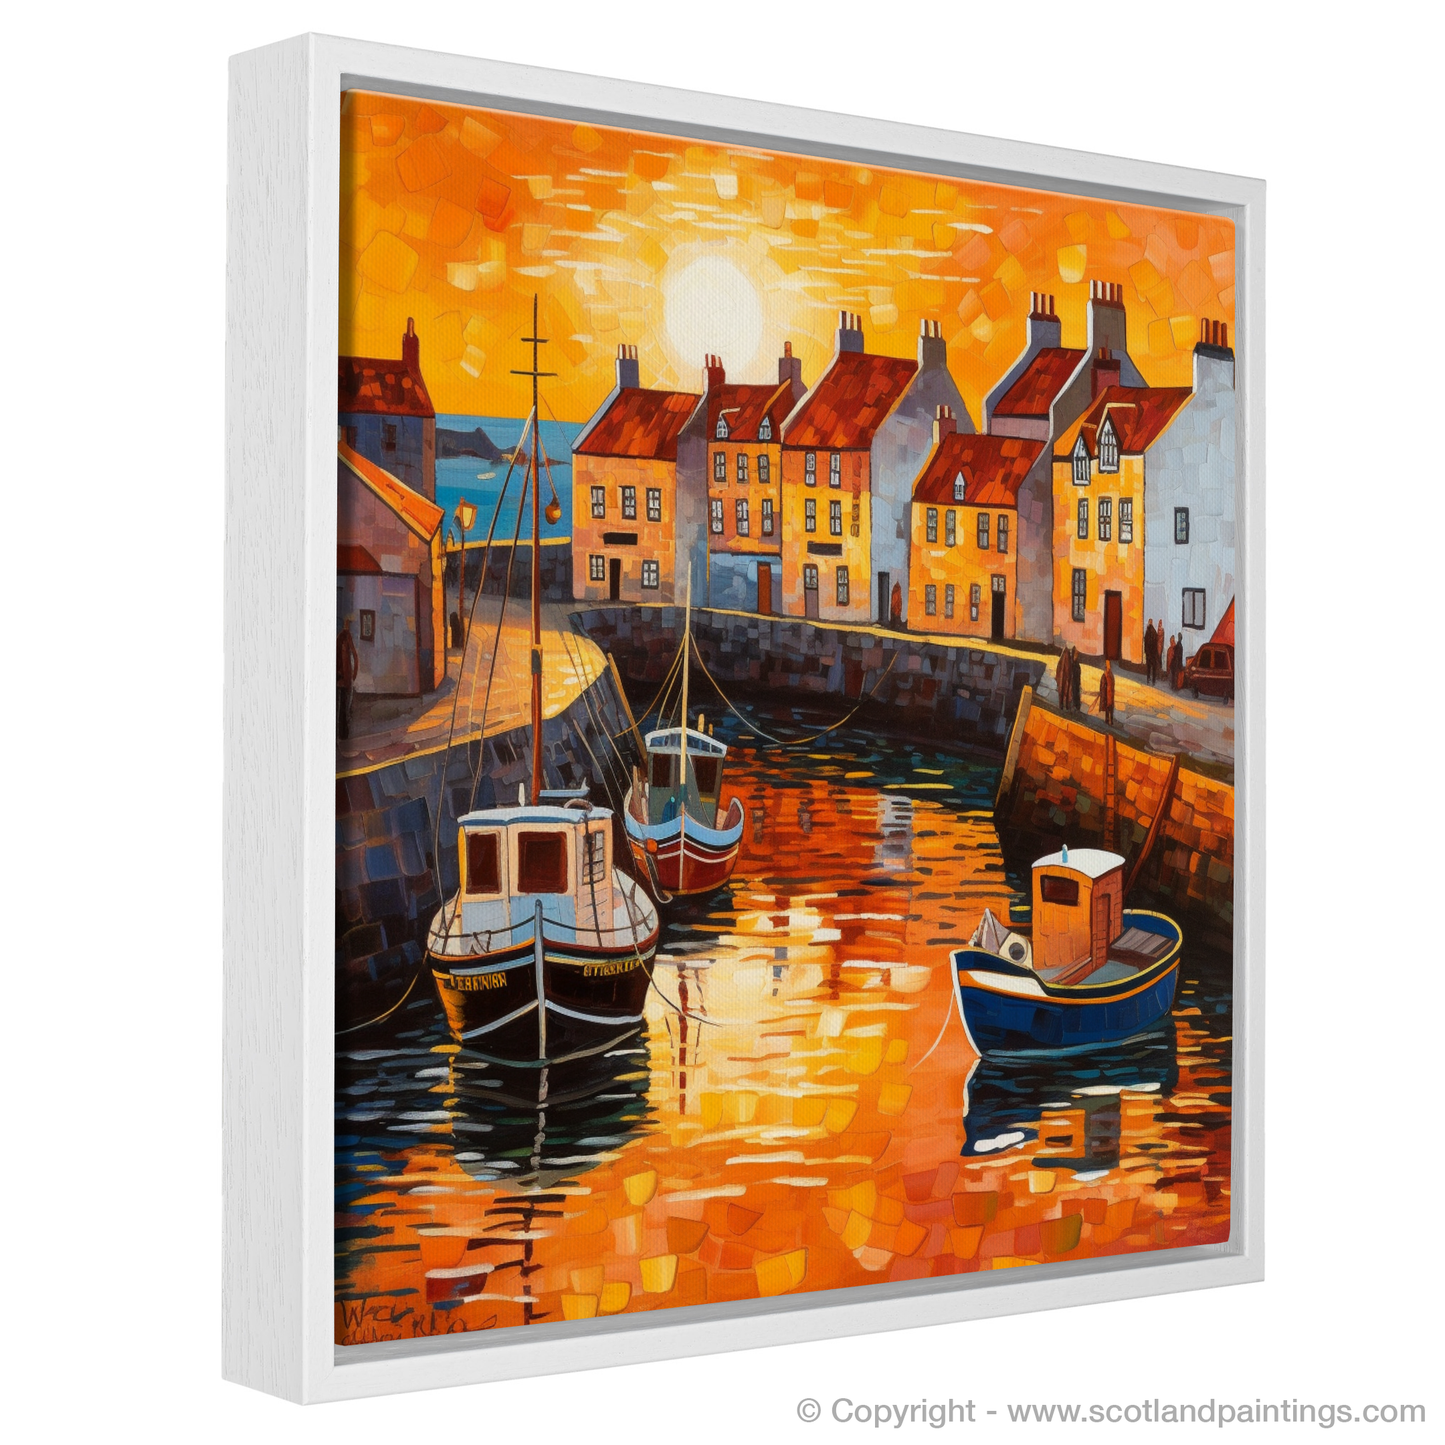 Twilight Enchantment at Pittenweem Harbour